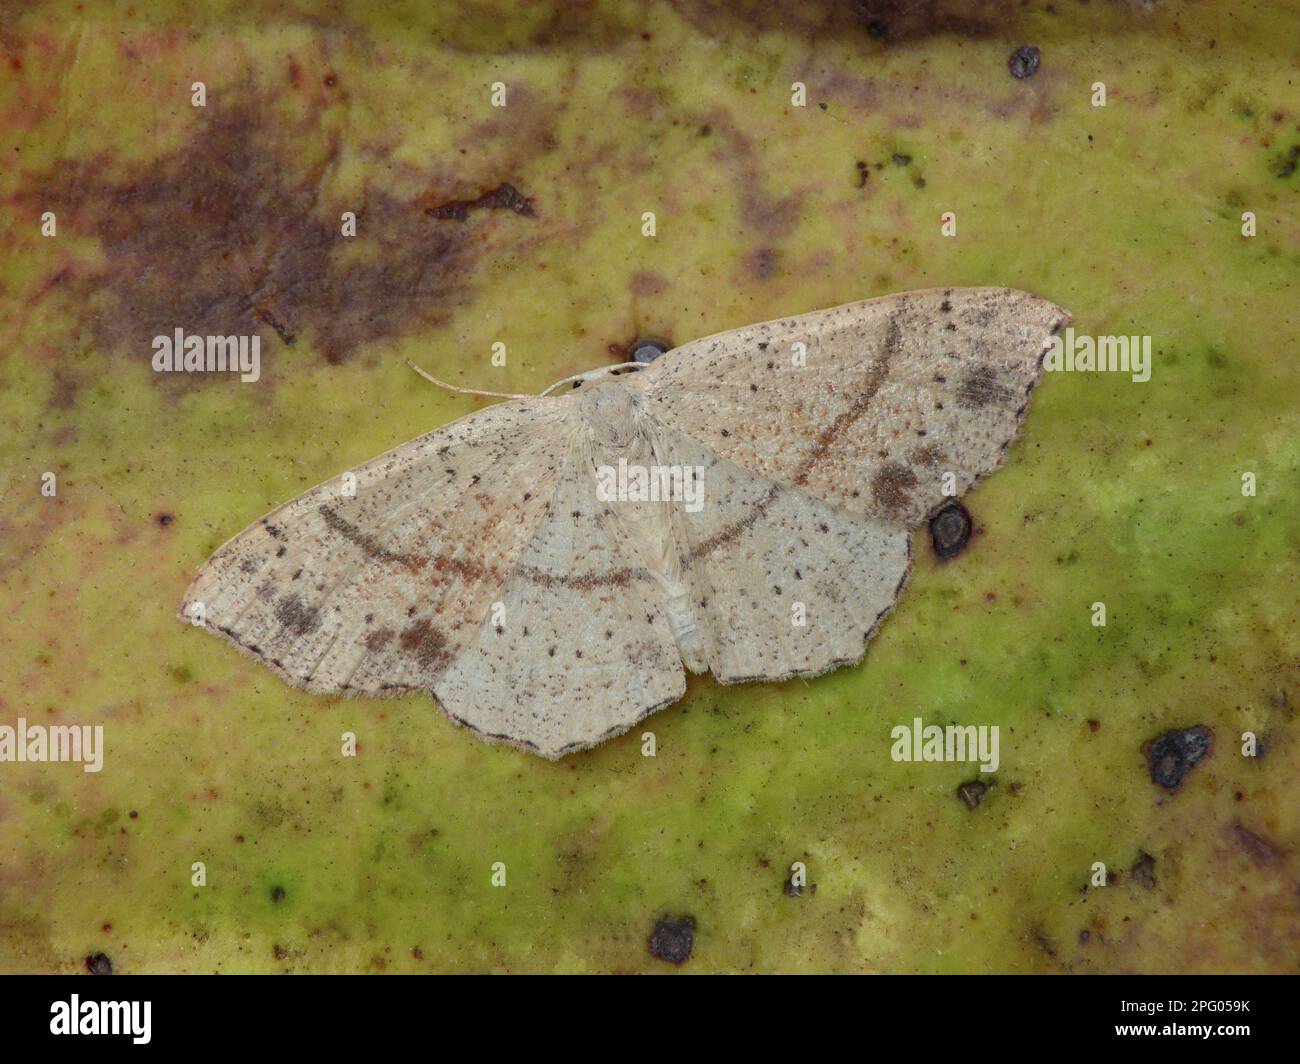 Dotted oak girdle moth (Cyclophora punctaria), Grey girdle moth, Insects, Moths, Butterflies, Animals, Other animals, Maiden's blush adult female, r Stock Photo